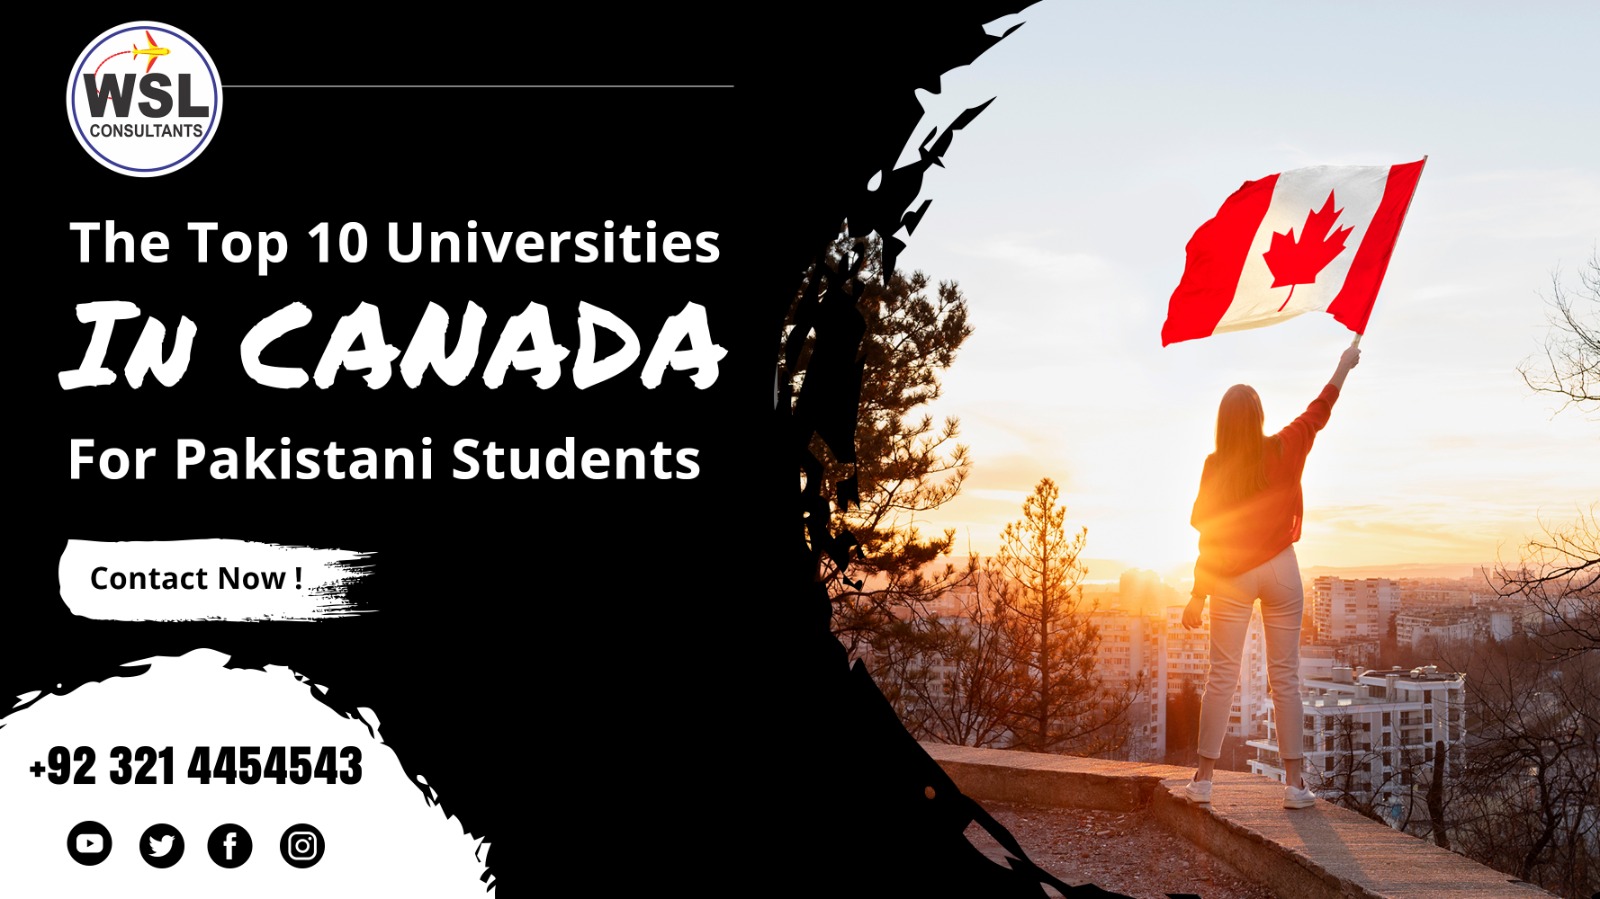 The Top 10 Universities in Canada for Pakistani Students